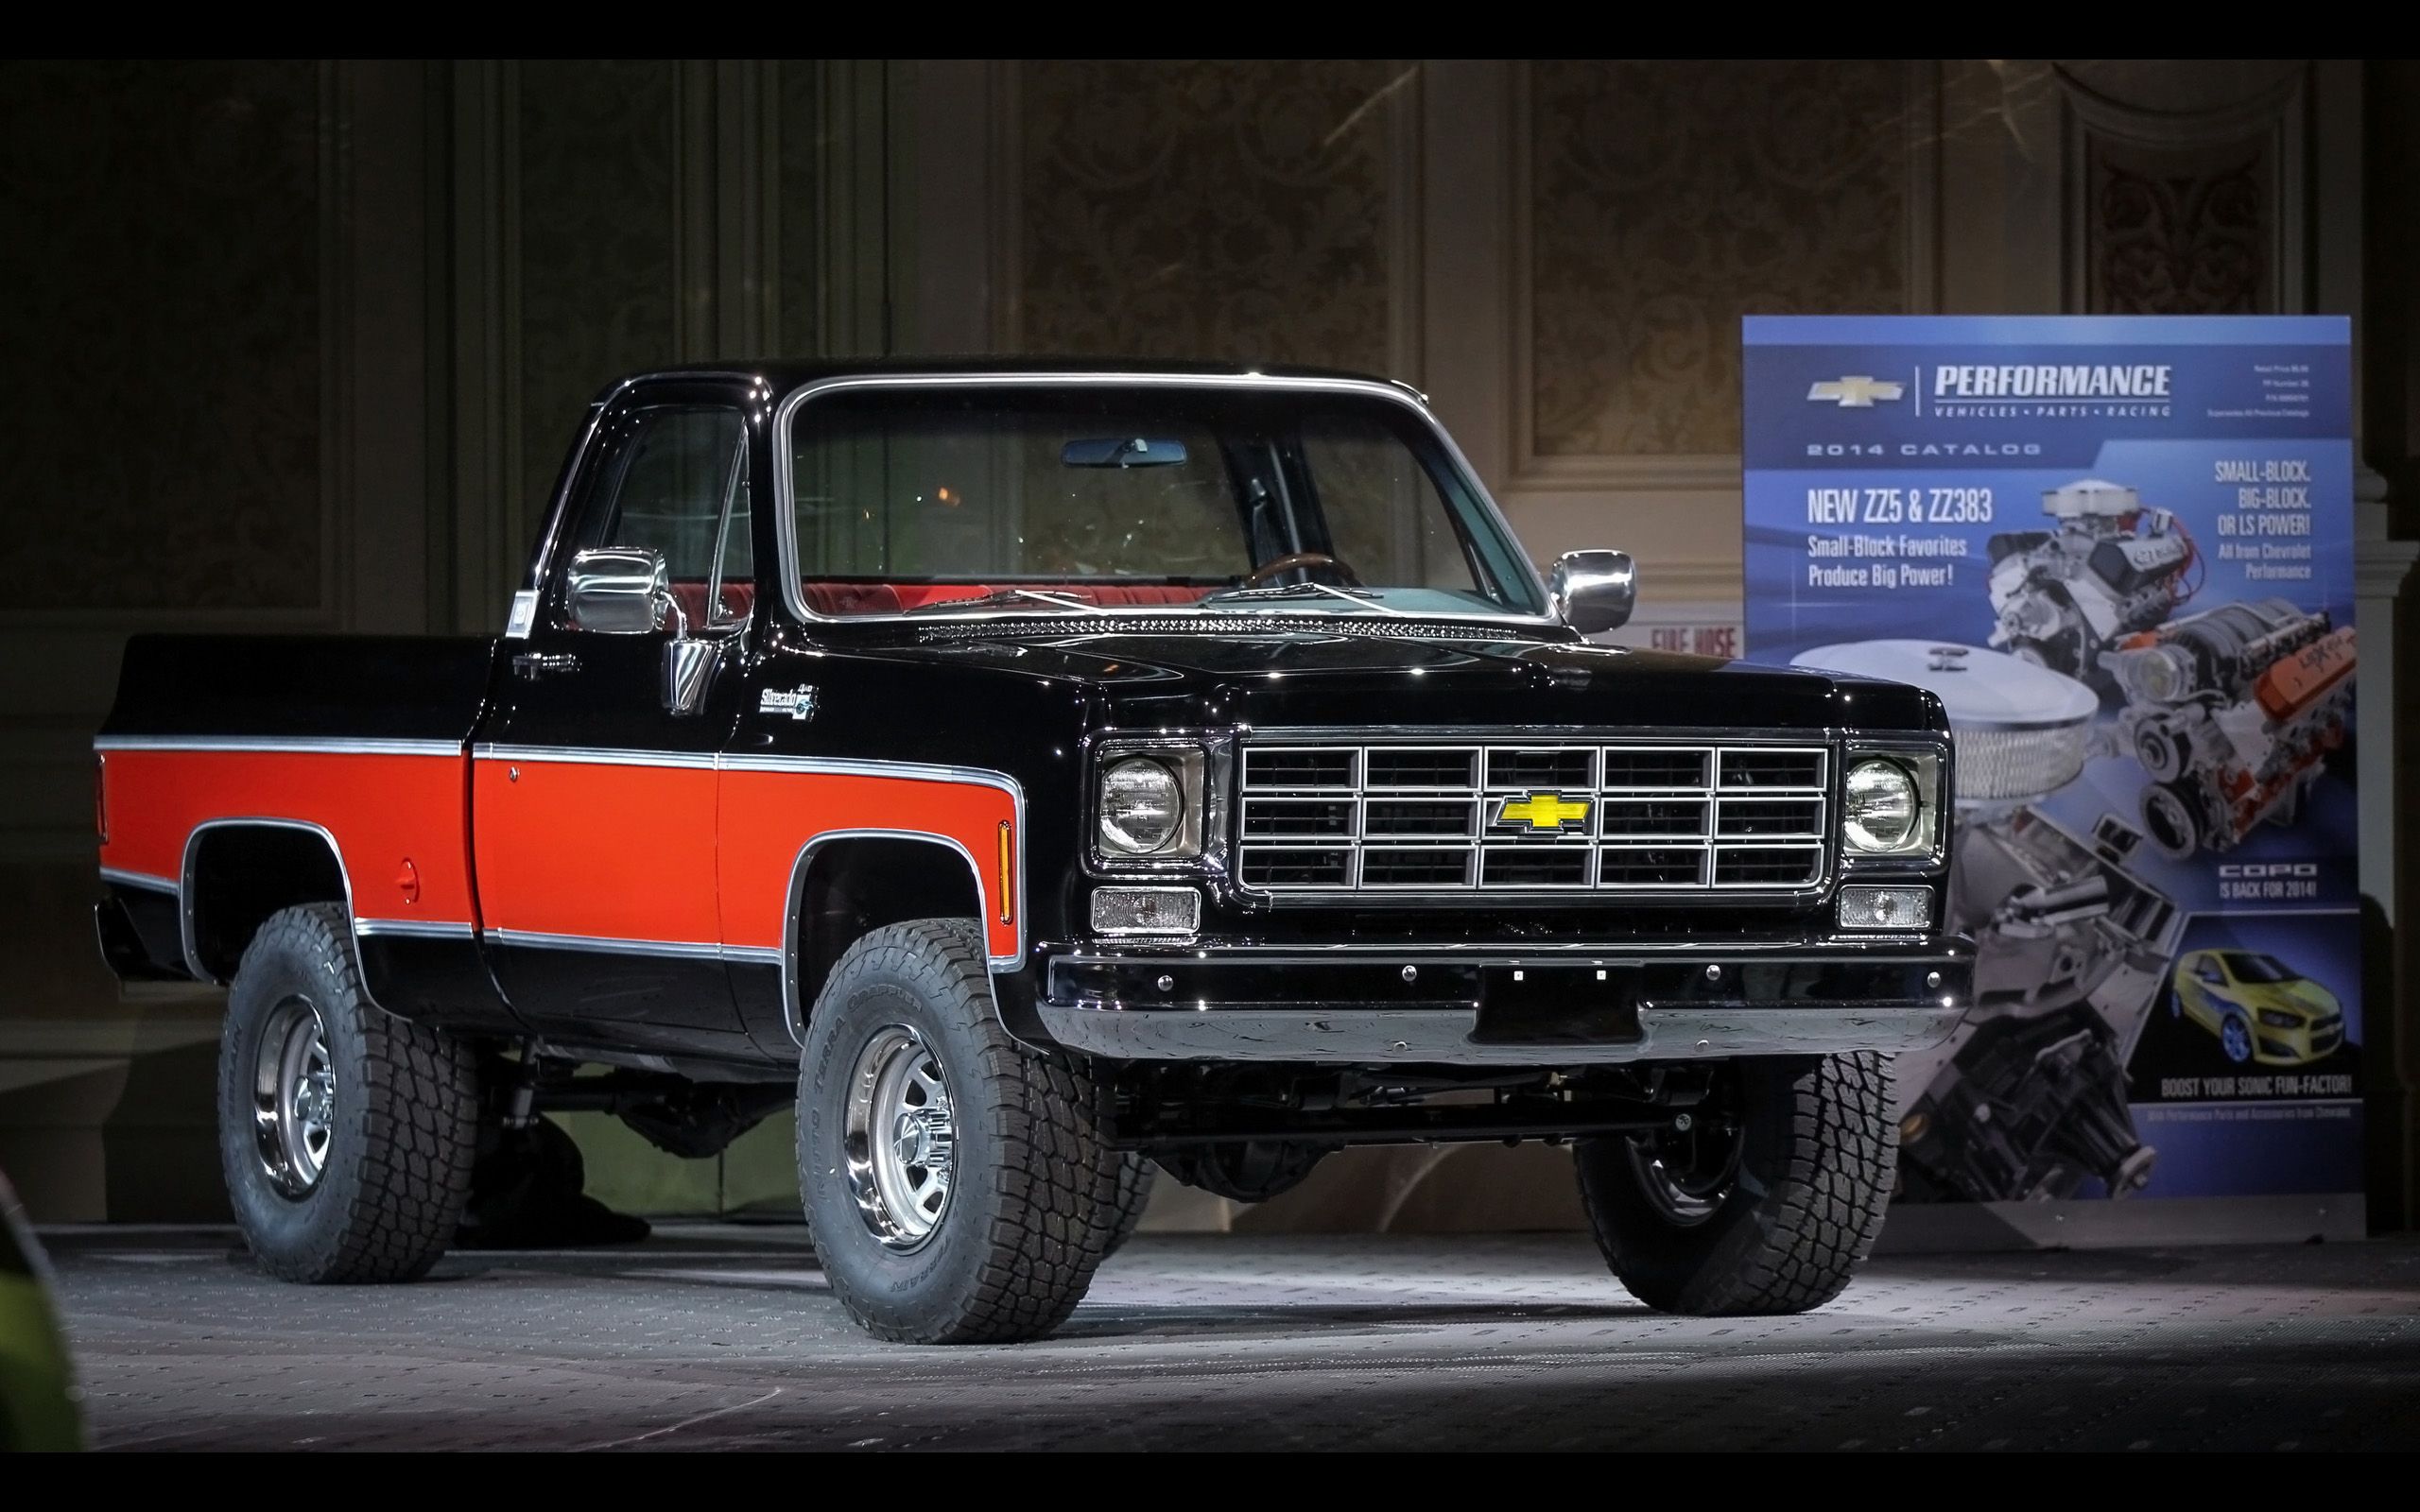 Chevrolet Truck Wallpaper For Android #CwW. Chevy trucks, Chevrolet trucks, 80s chevy truck